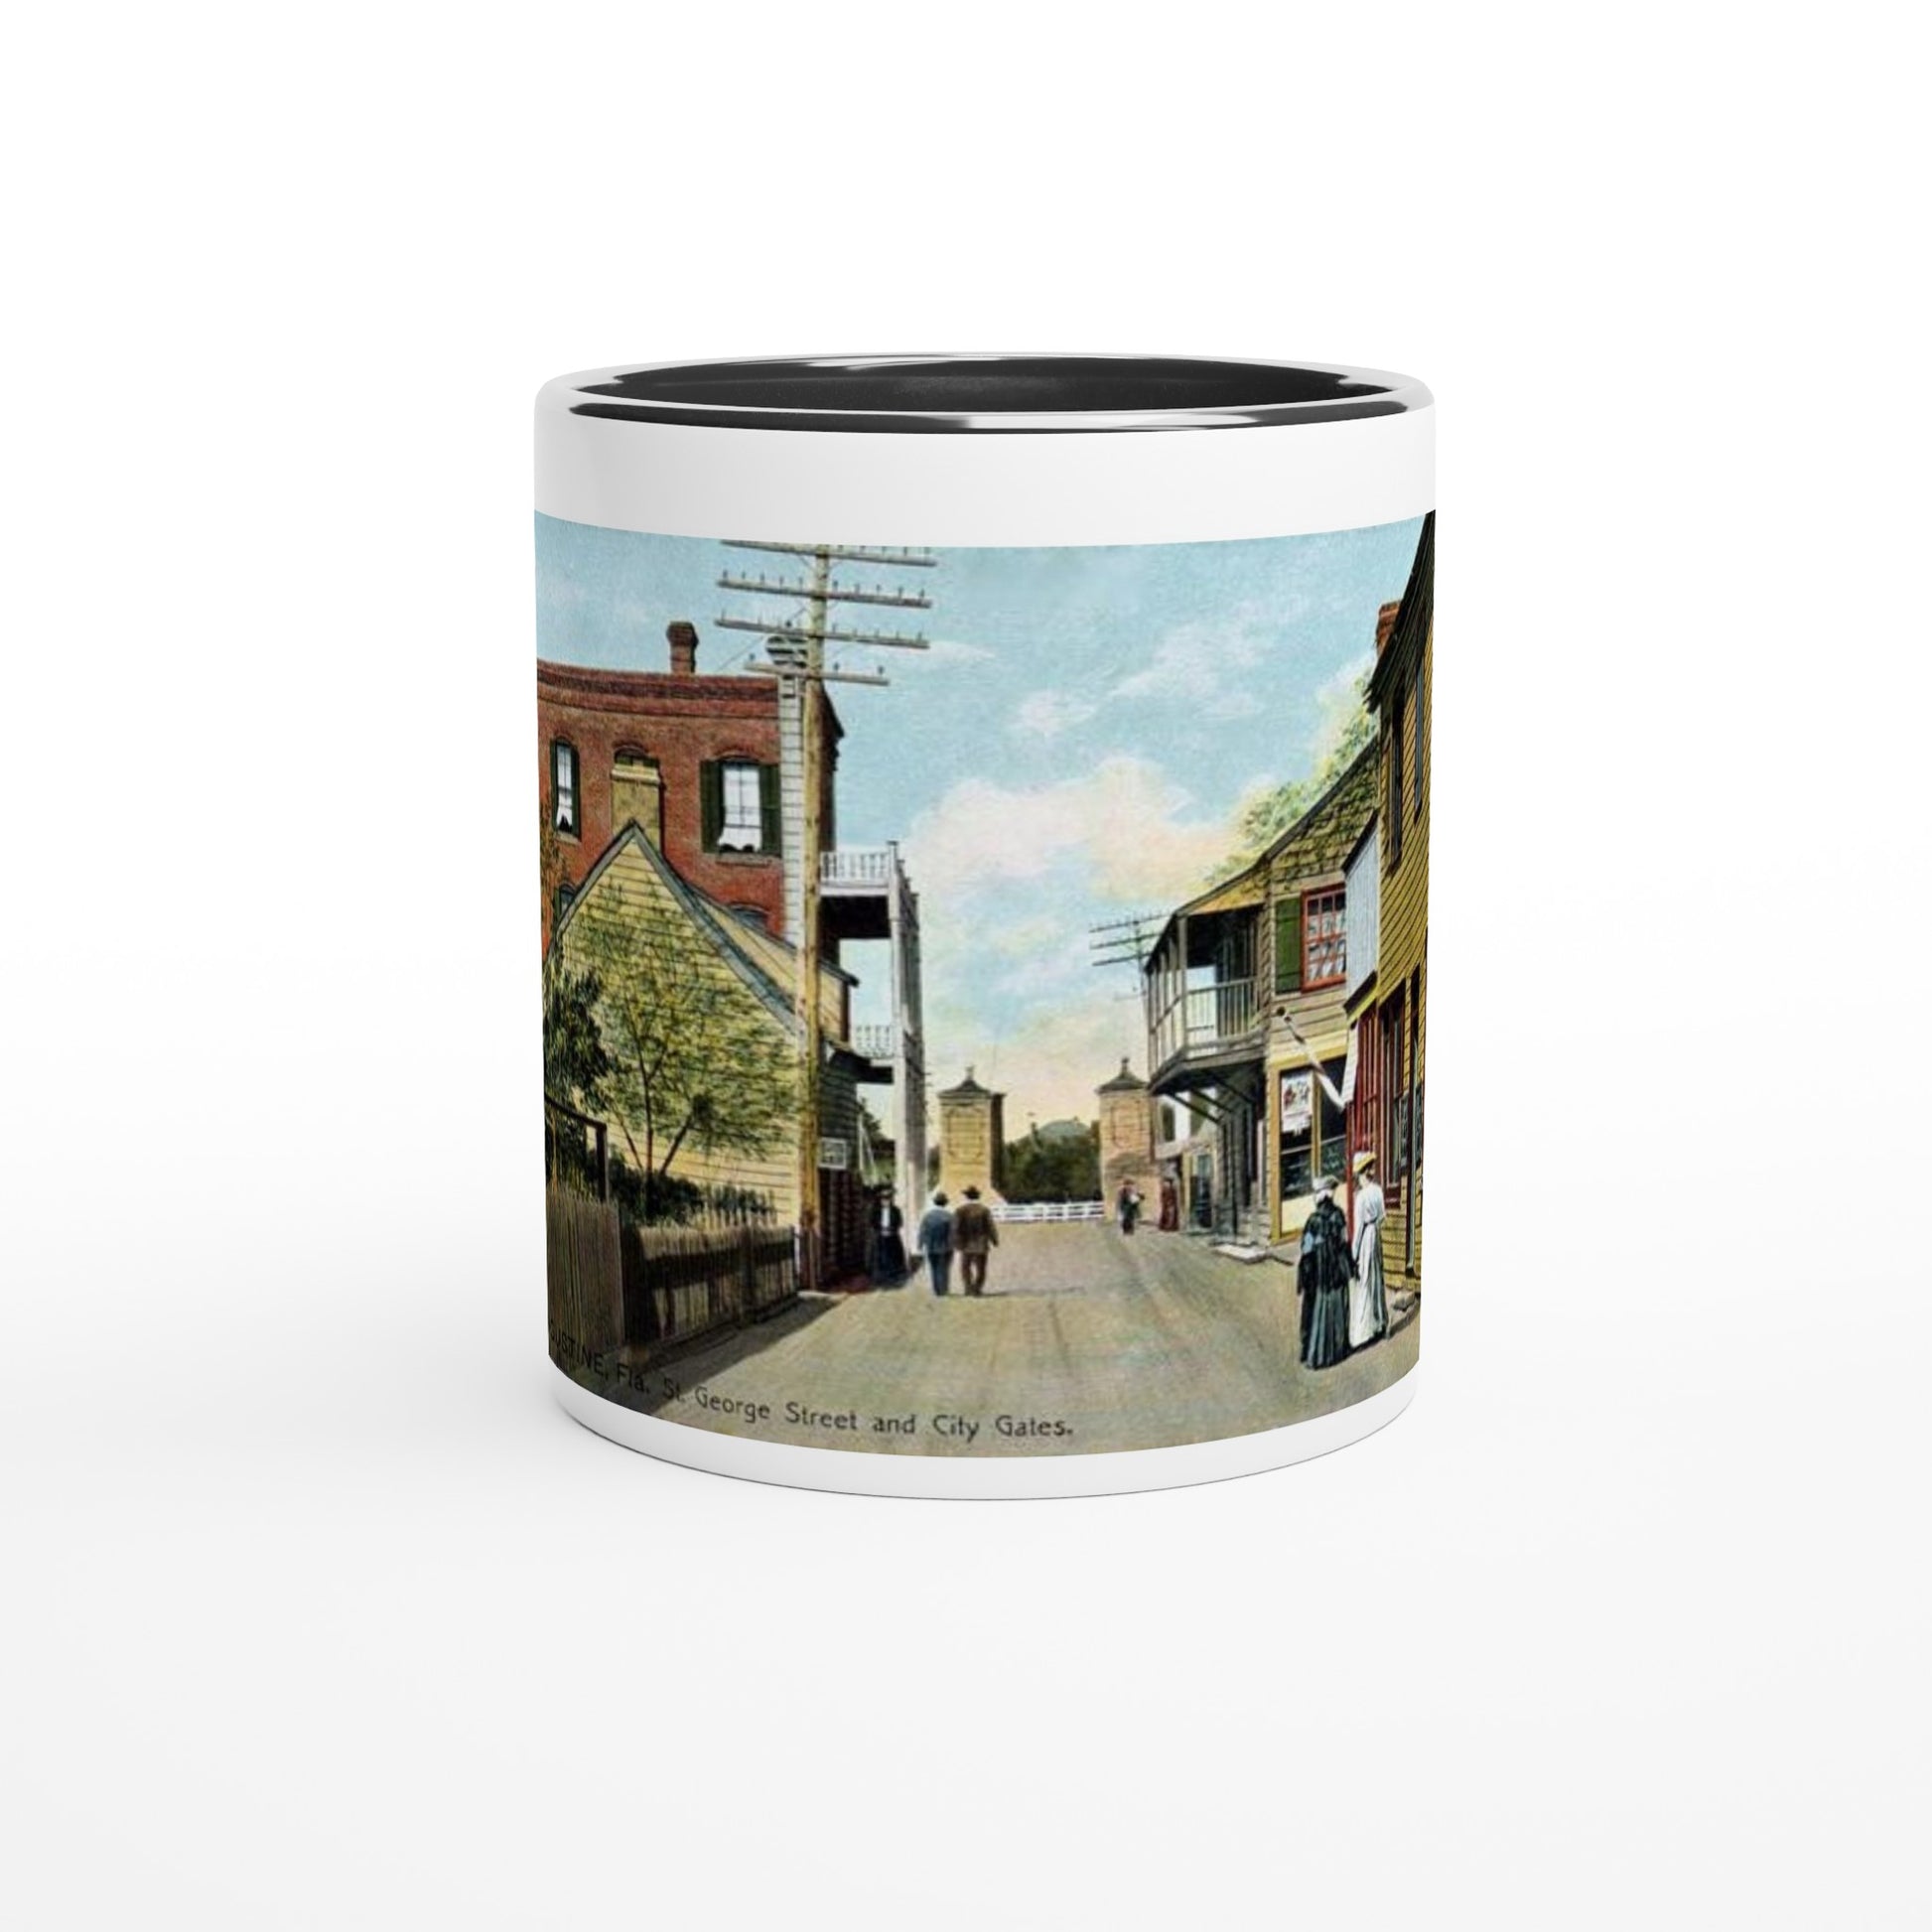 Ceramic mug with image looking up Saint Georg Street in Saint Augustine toward the old city gate (image 2)